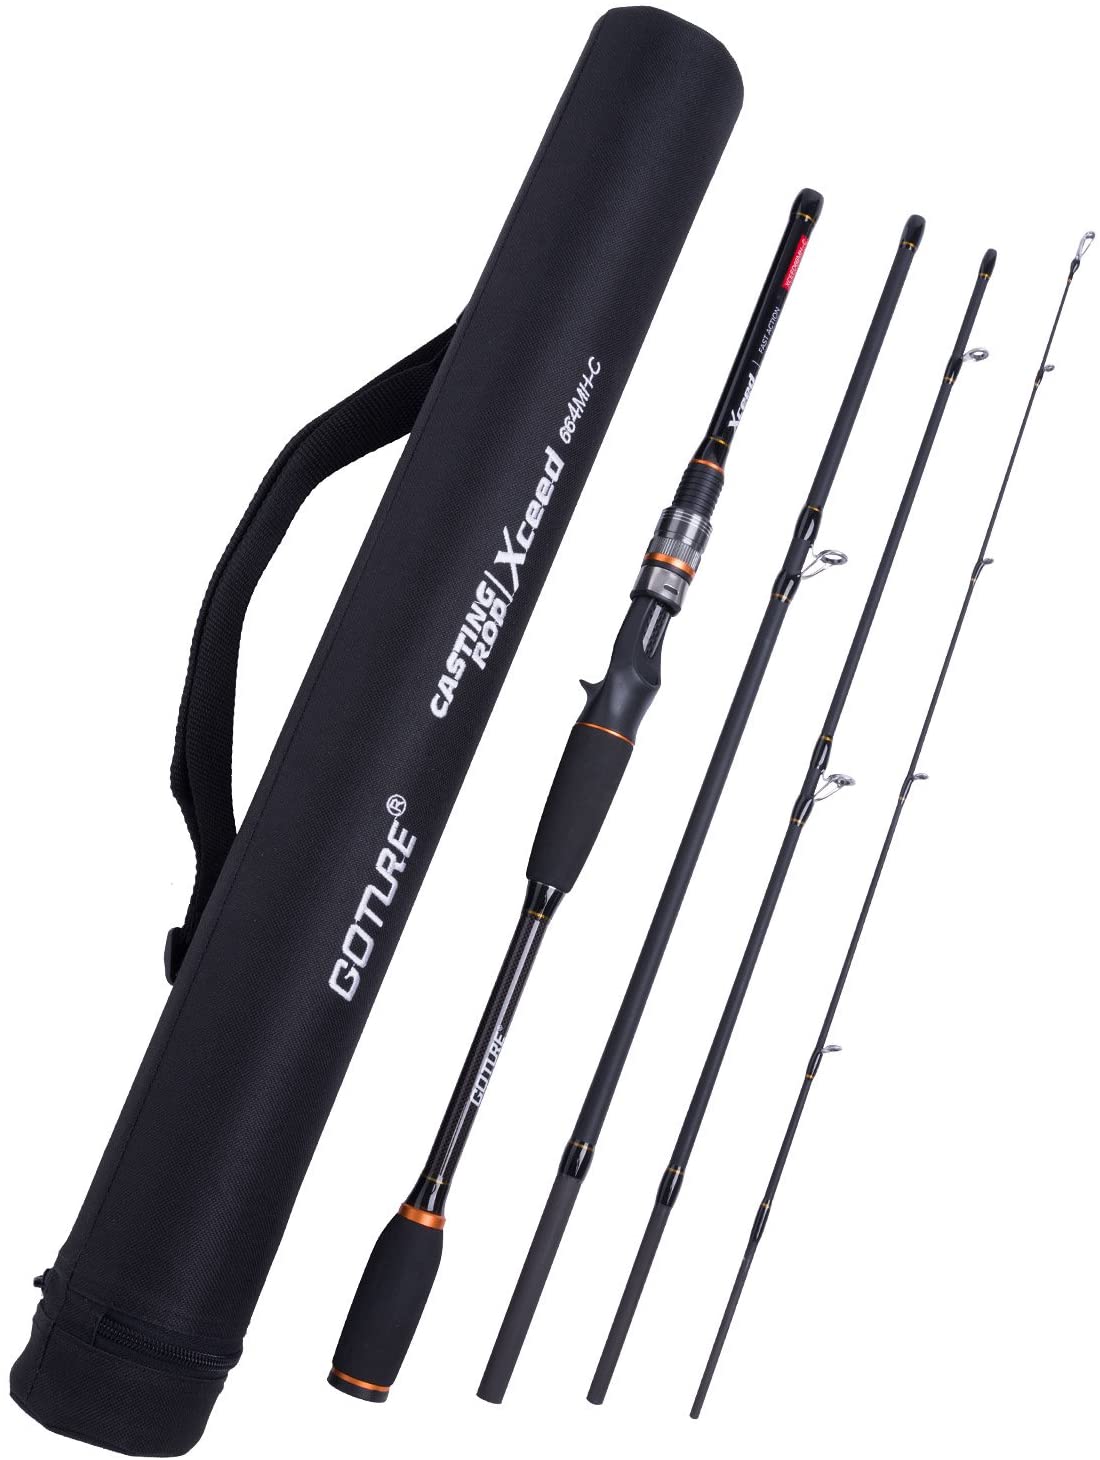 Xceed Spinning/Casting Rod - GOTURE